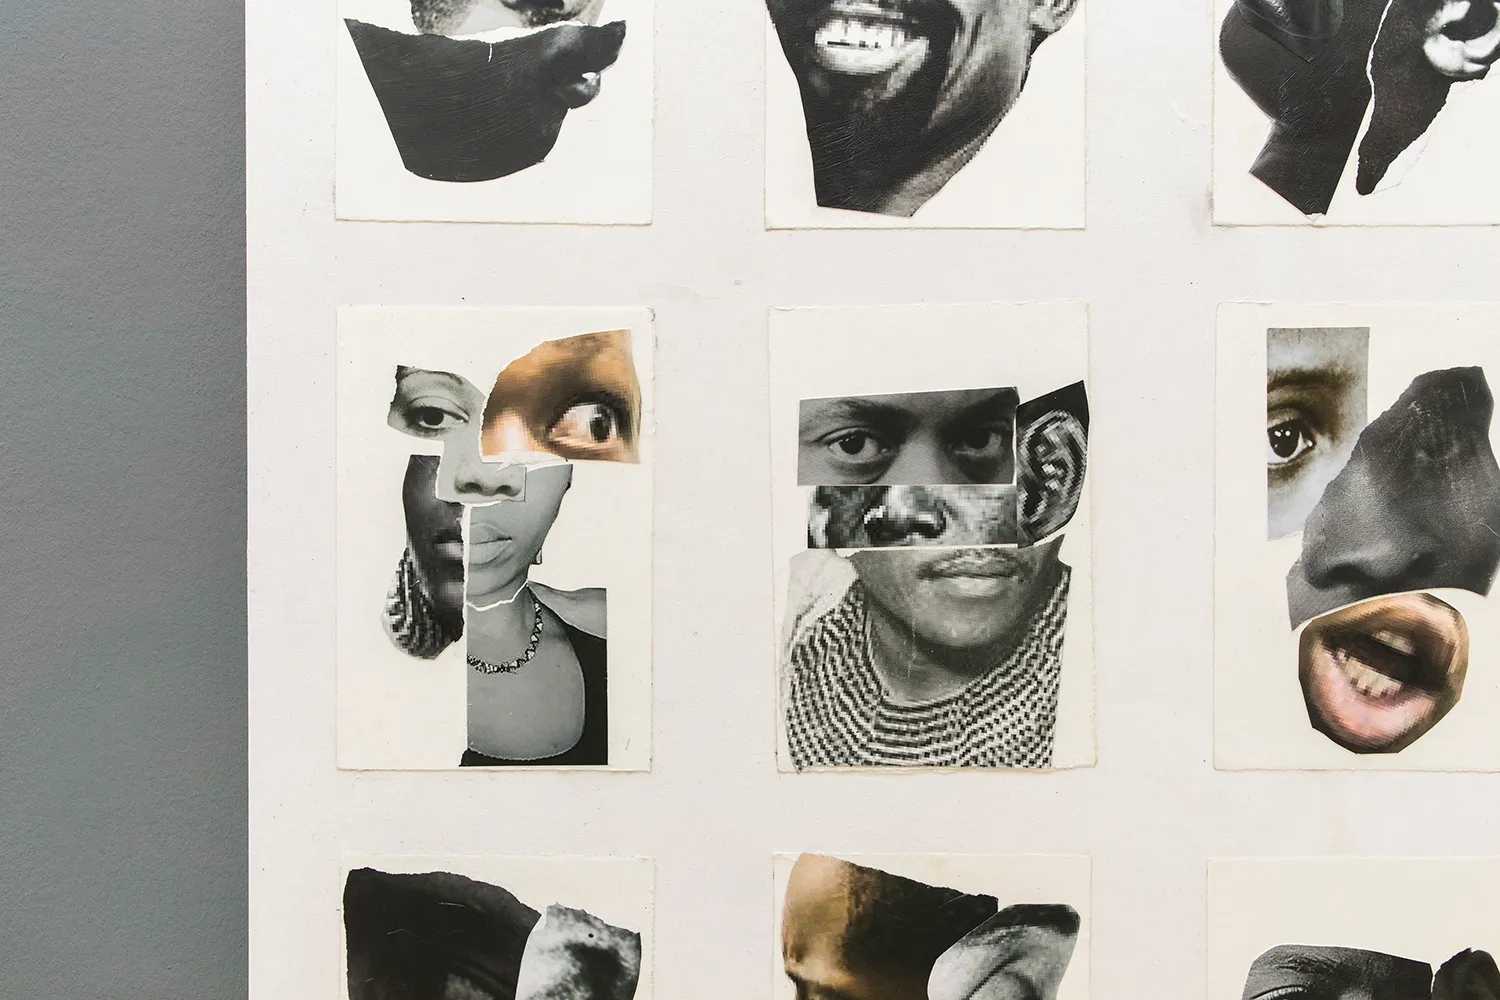 Close up of the collages of faces with different parts (eyes, ears, mouth etc)